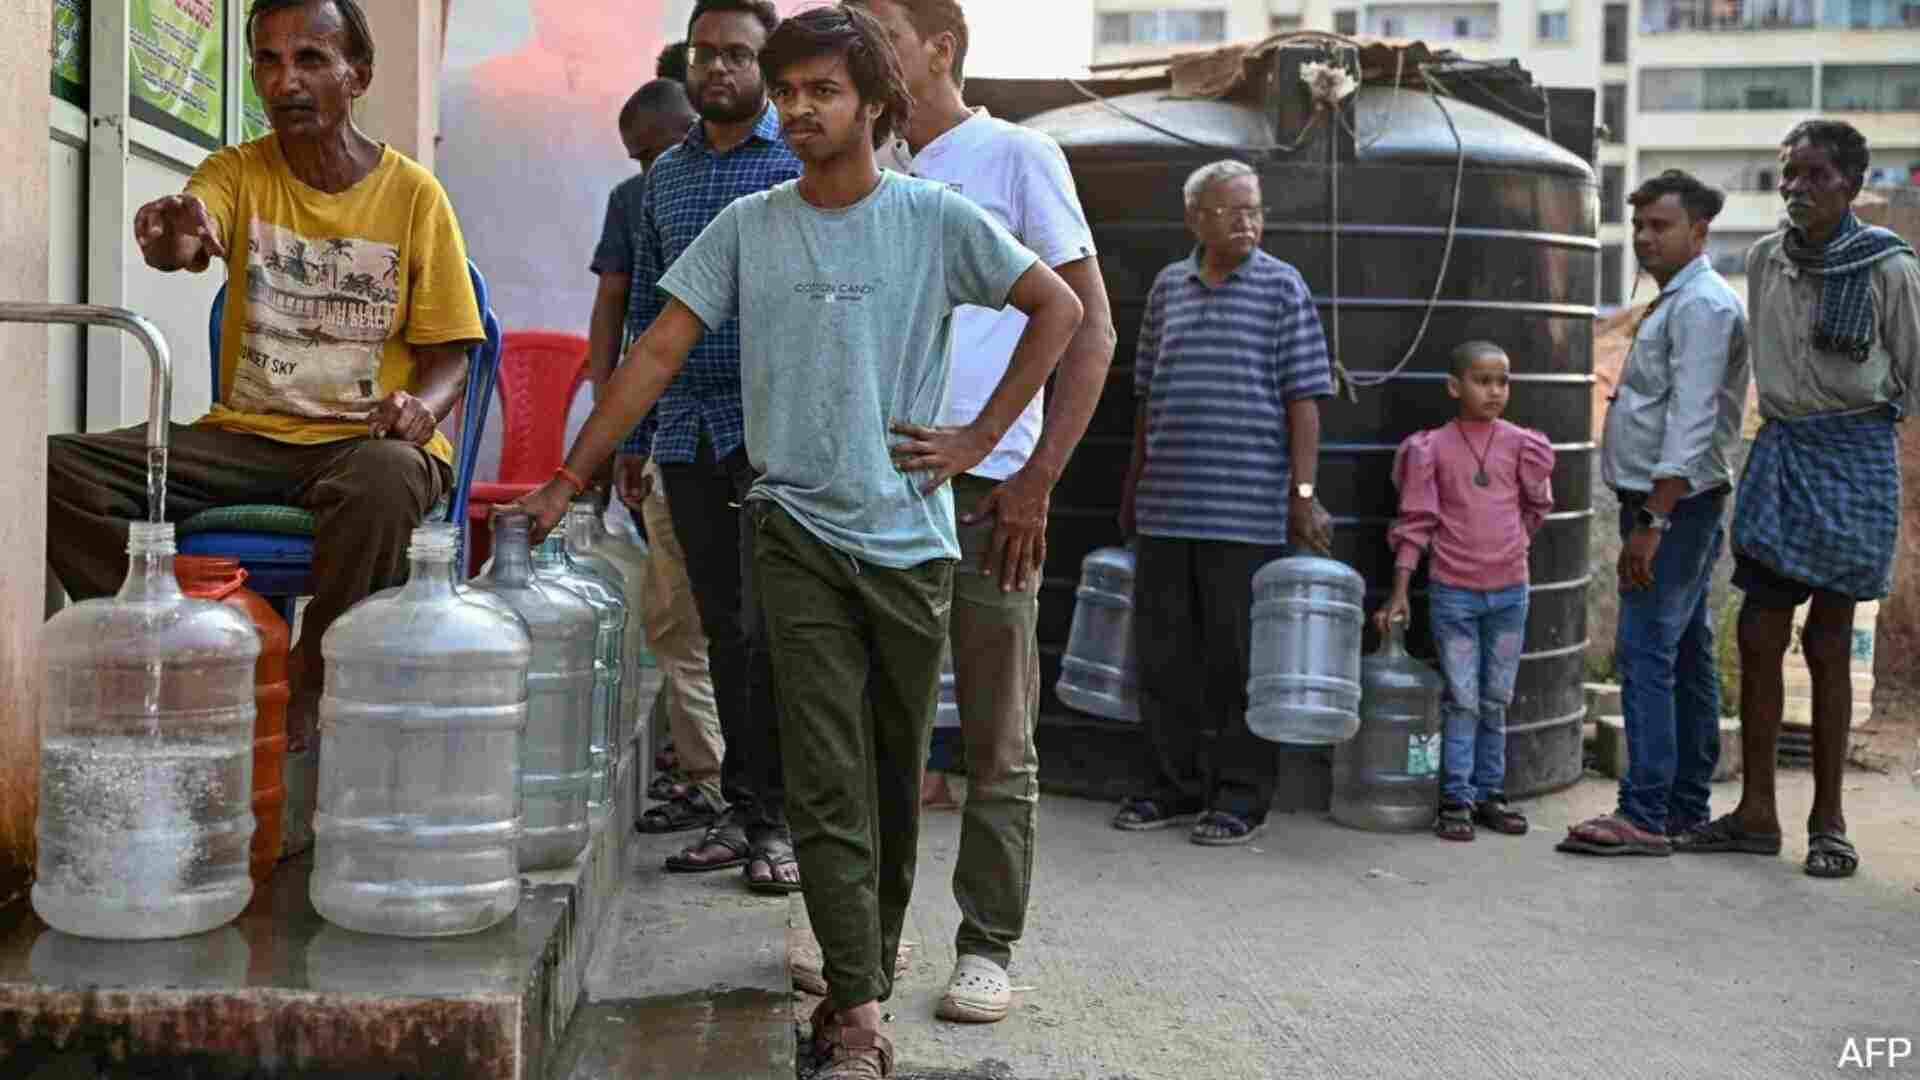 What factors are contributing to the threat of ‘No Water’ in Bengaluru?